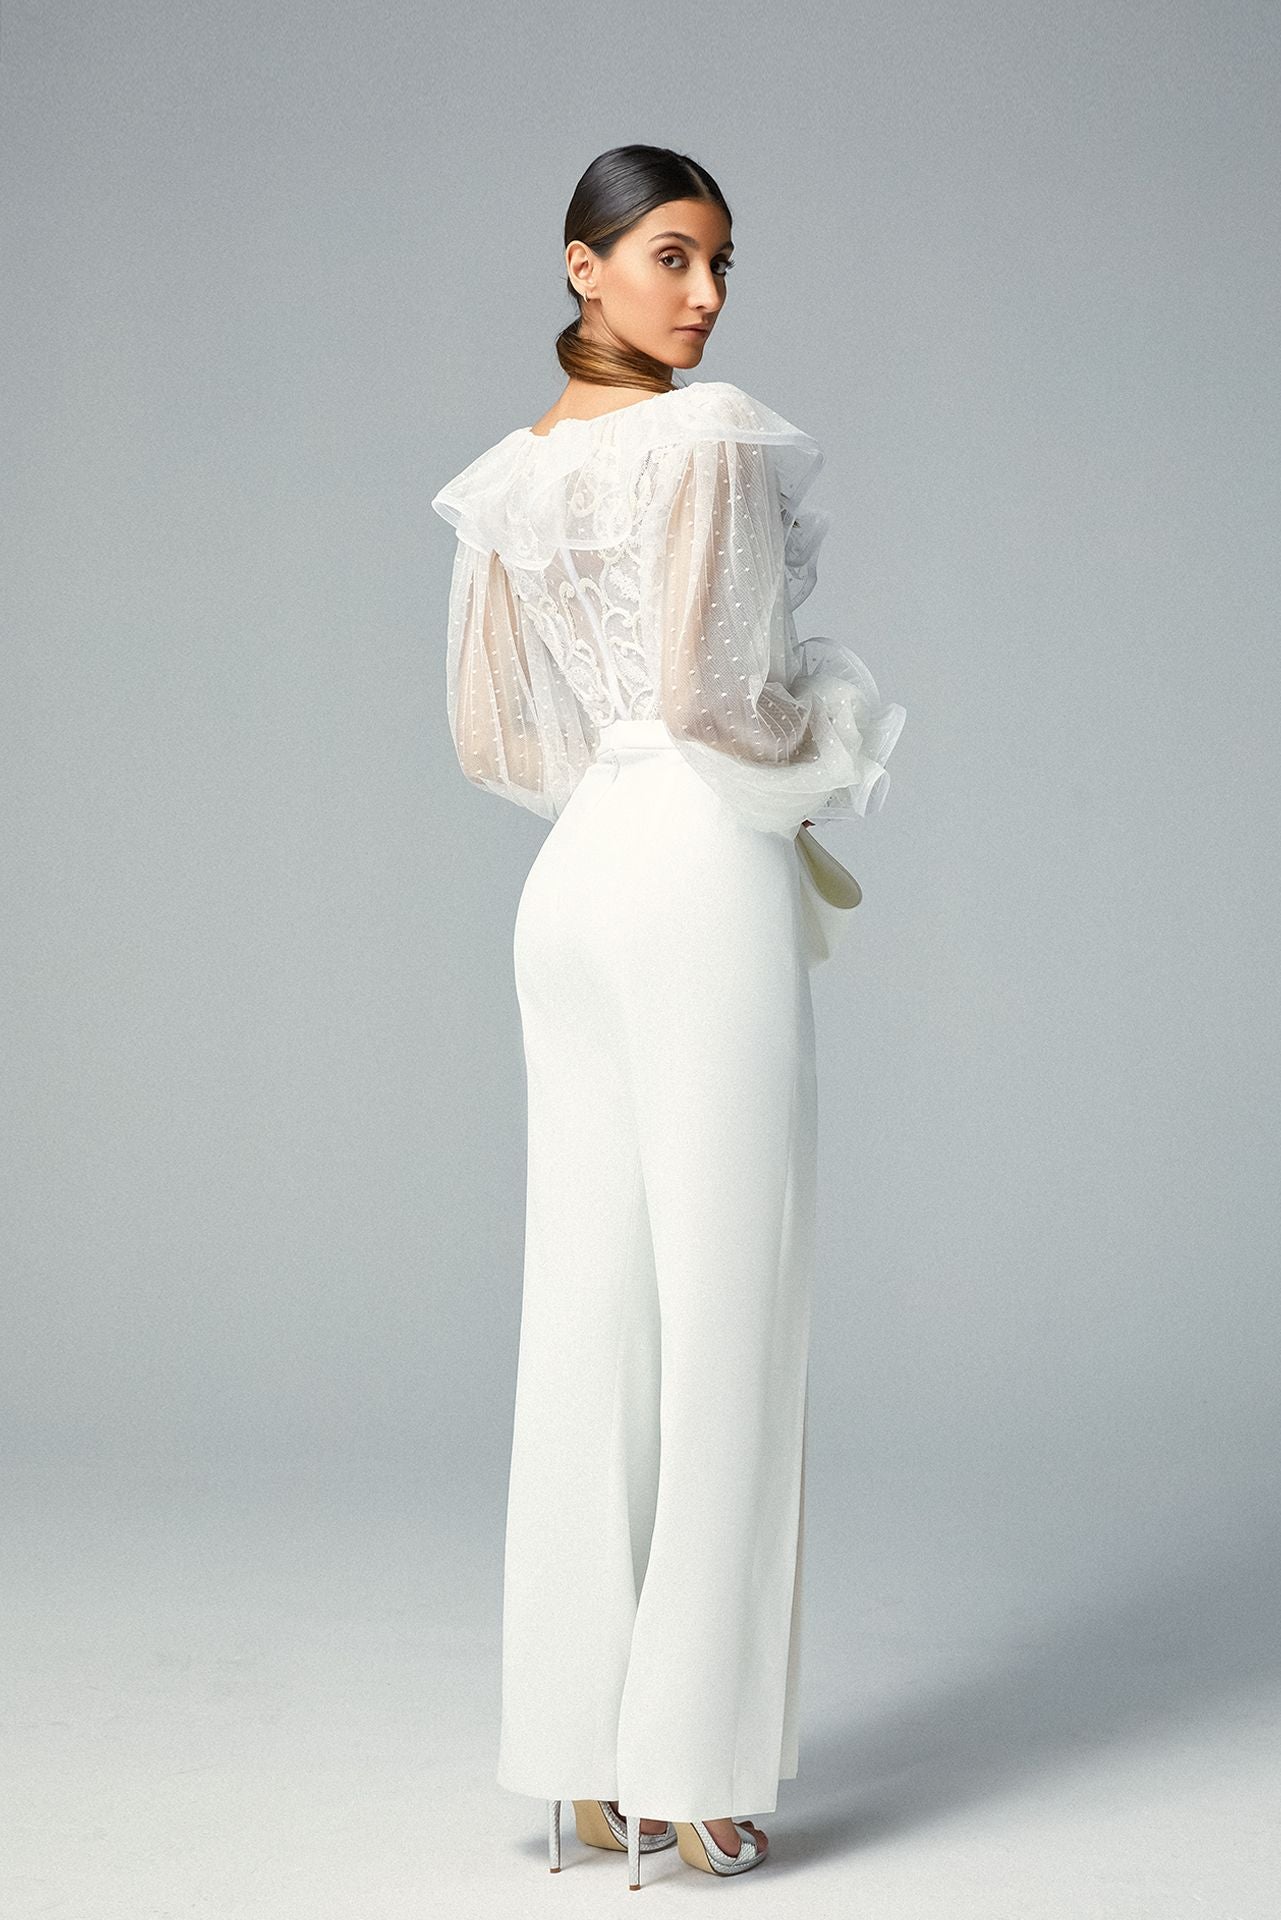 Embroidered White Corset Top Sequined Motifs, Bow Tie White Crepe Pant –  Gattinolli by Marwan